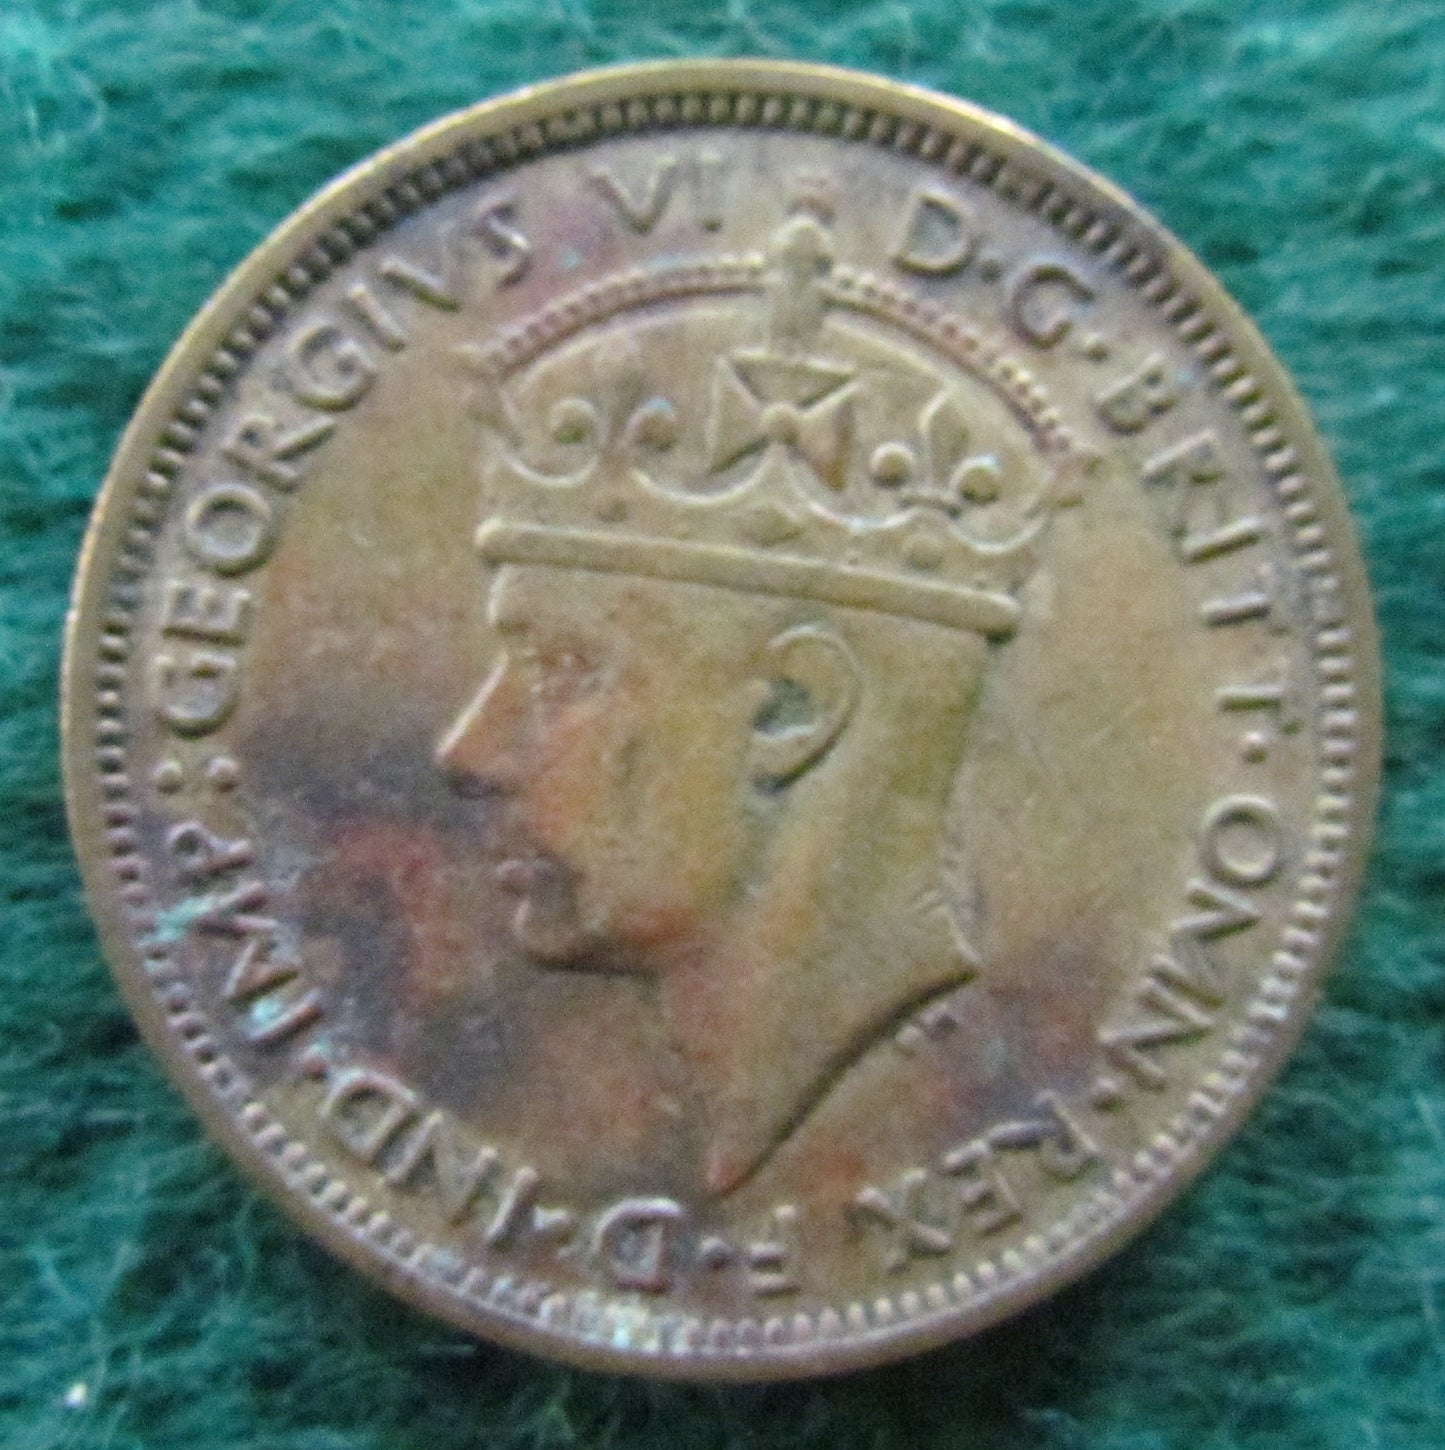 British West Africa 1939 1 Shilling King George VI Coin - Circulated